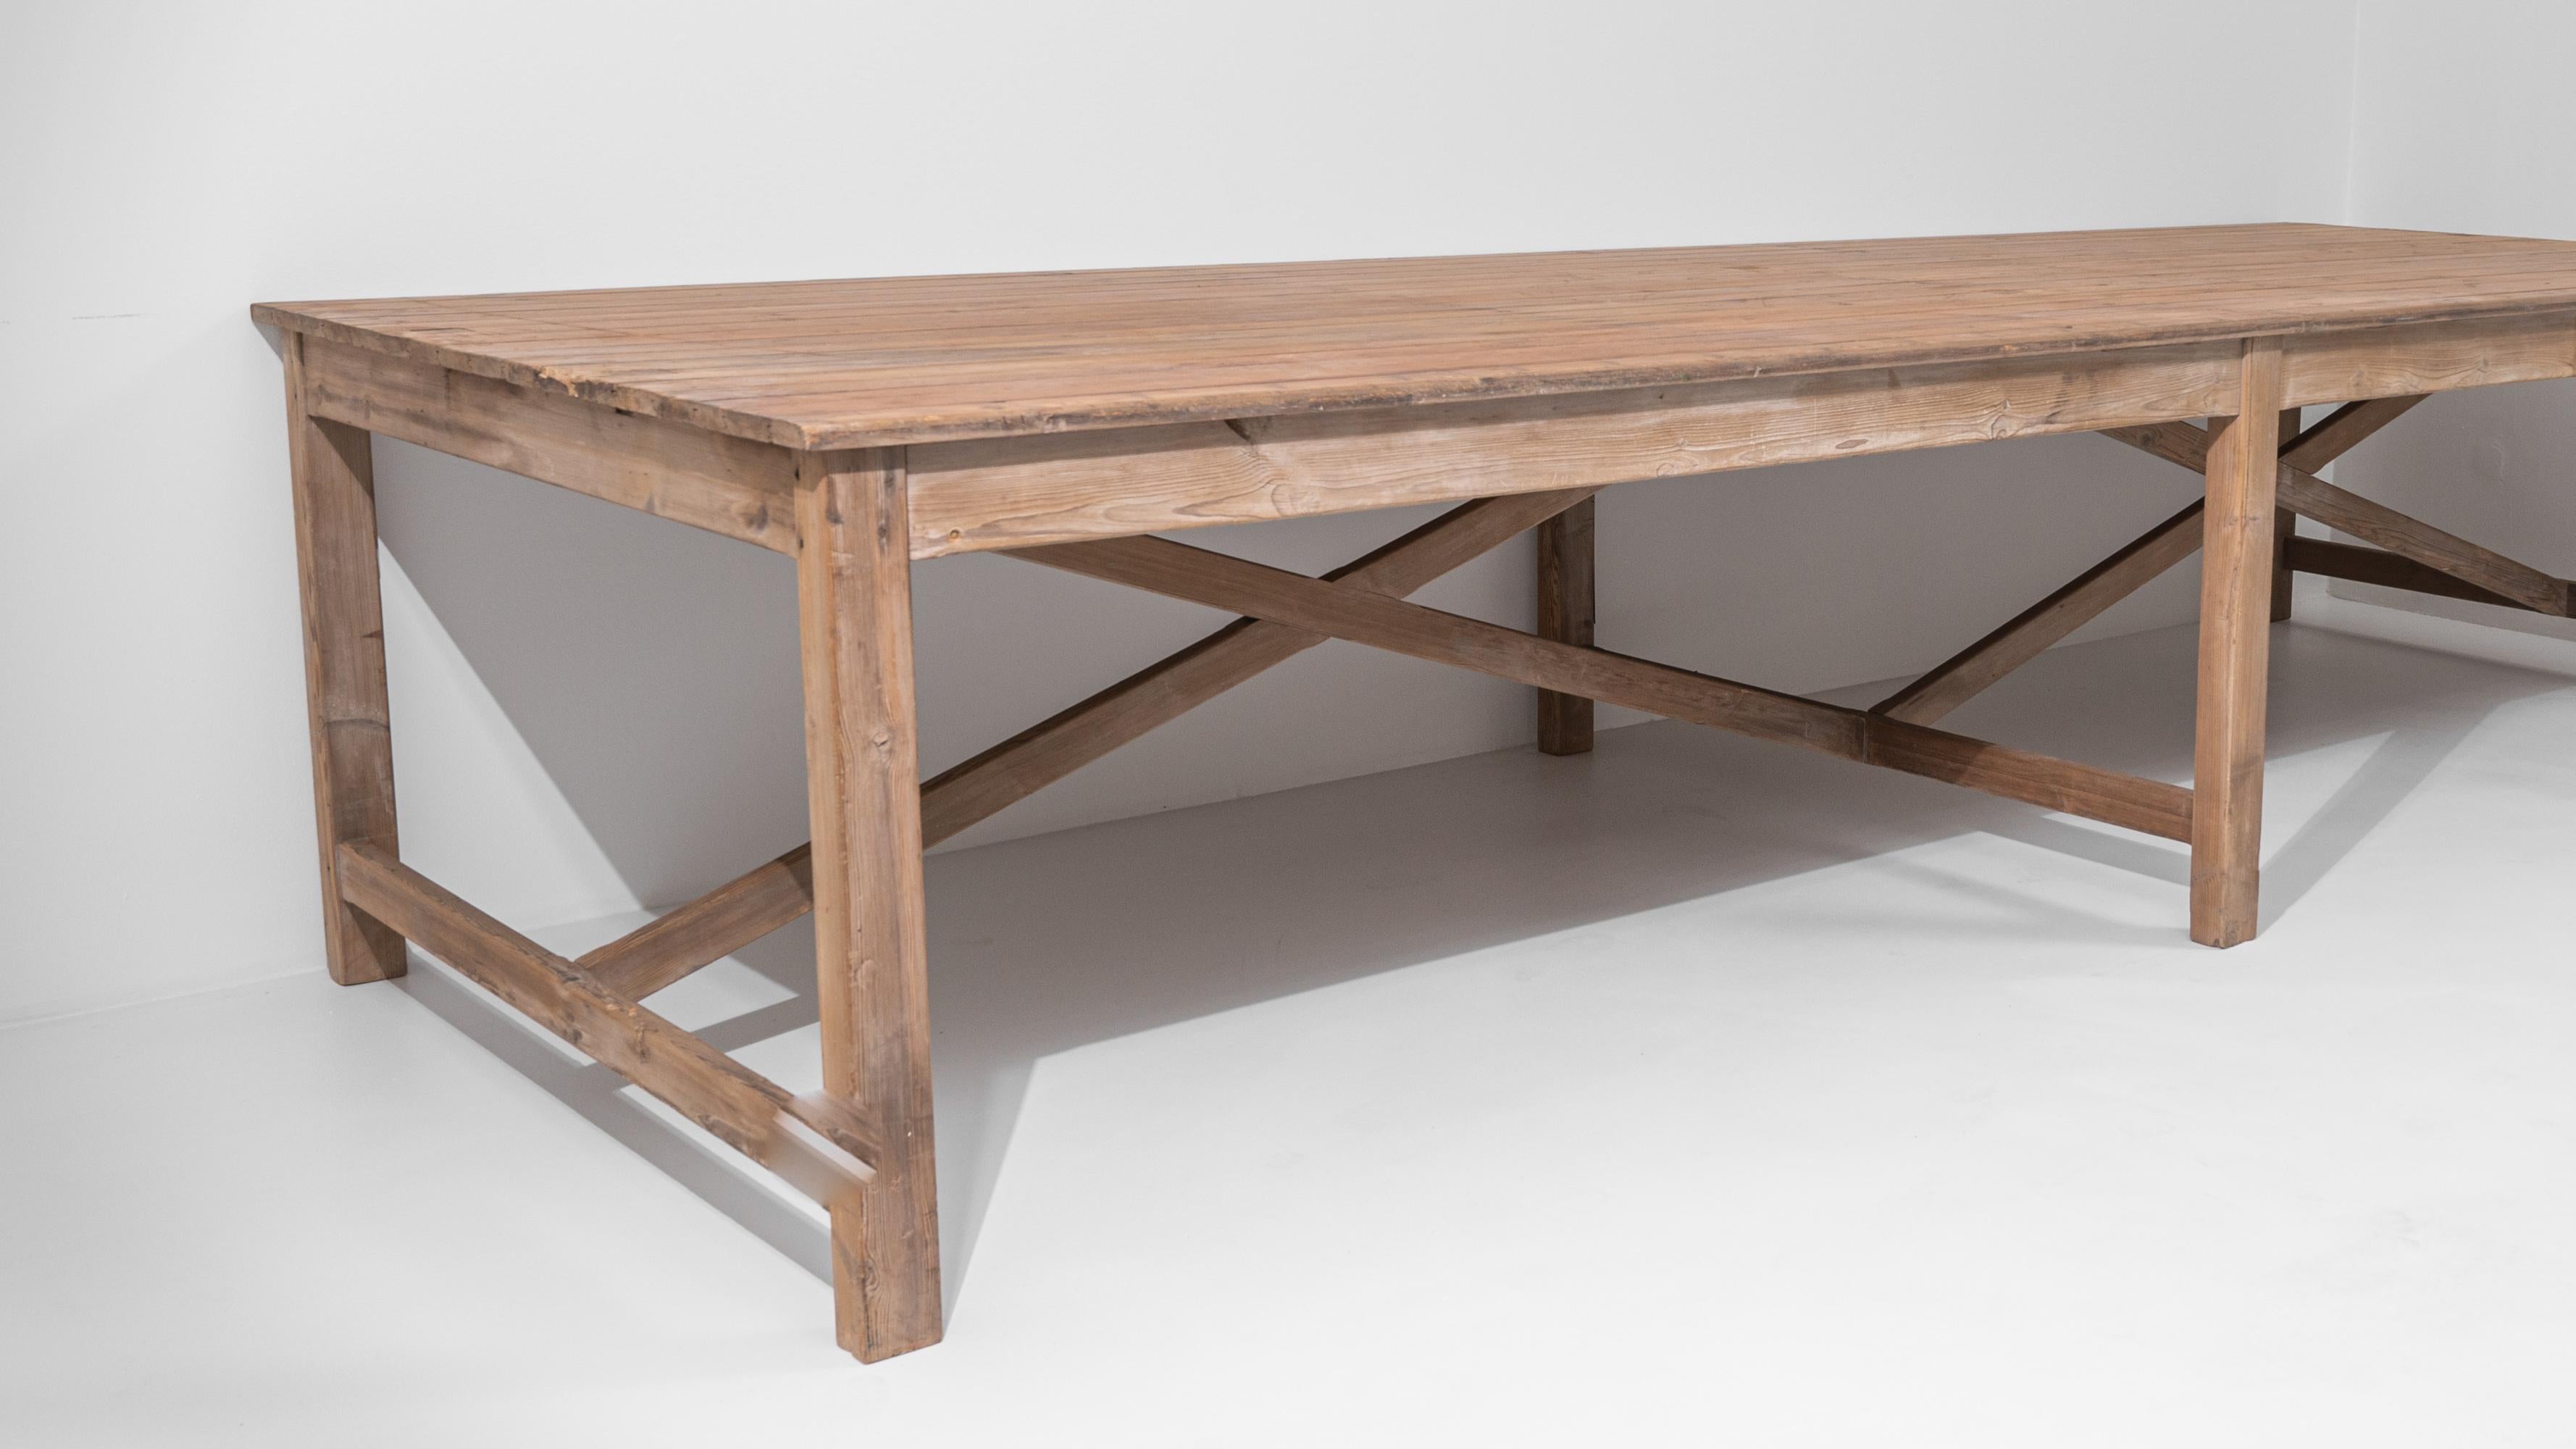 Early 20th Century Turn of the Century French Wooden Farm Table